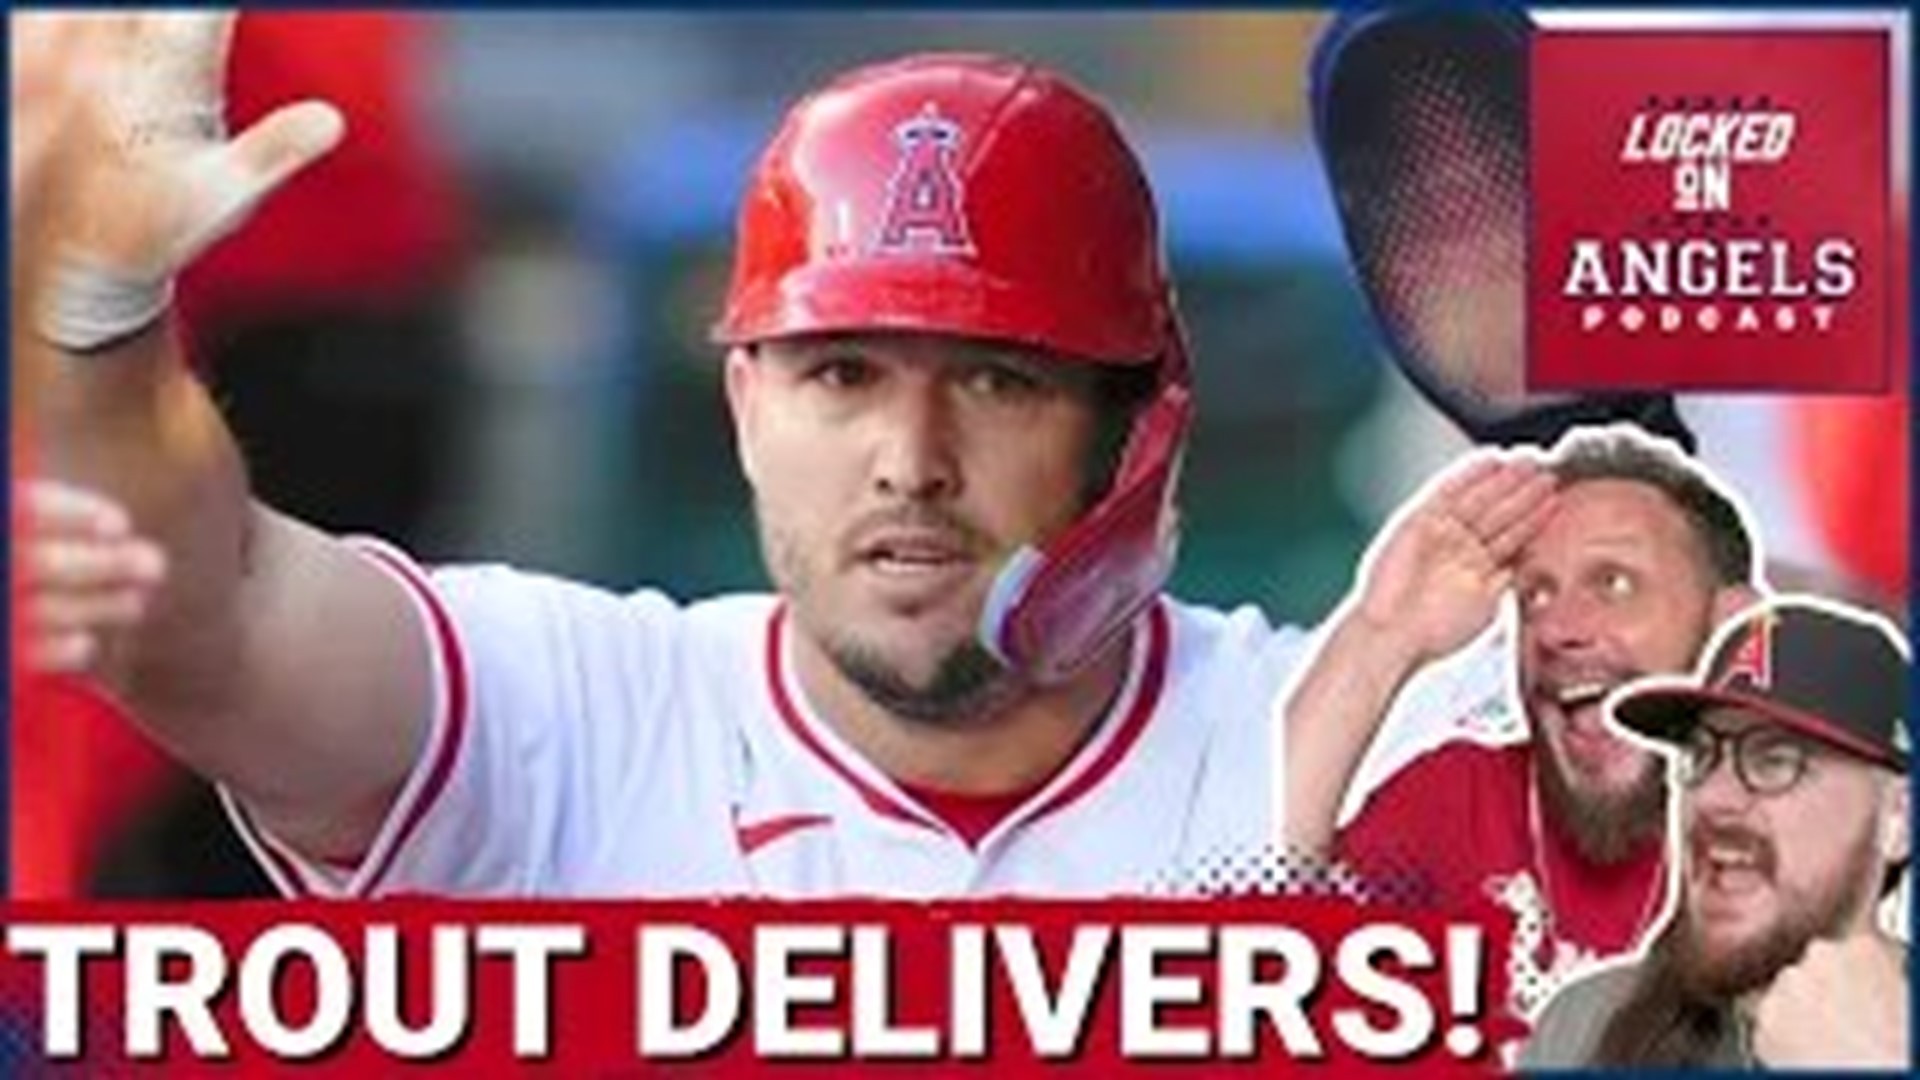 The Los Angeles Angels relied on their heavy hitters in Mike Trout and Taylor Ward to help them to a 7-3 victory over the Tampa Bay Rays on Monday night.